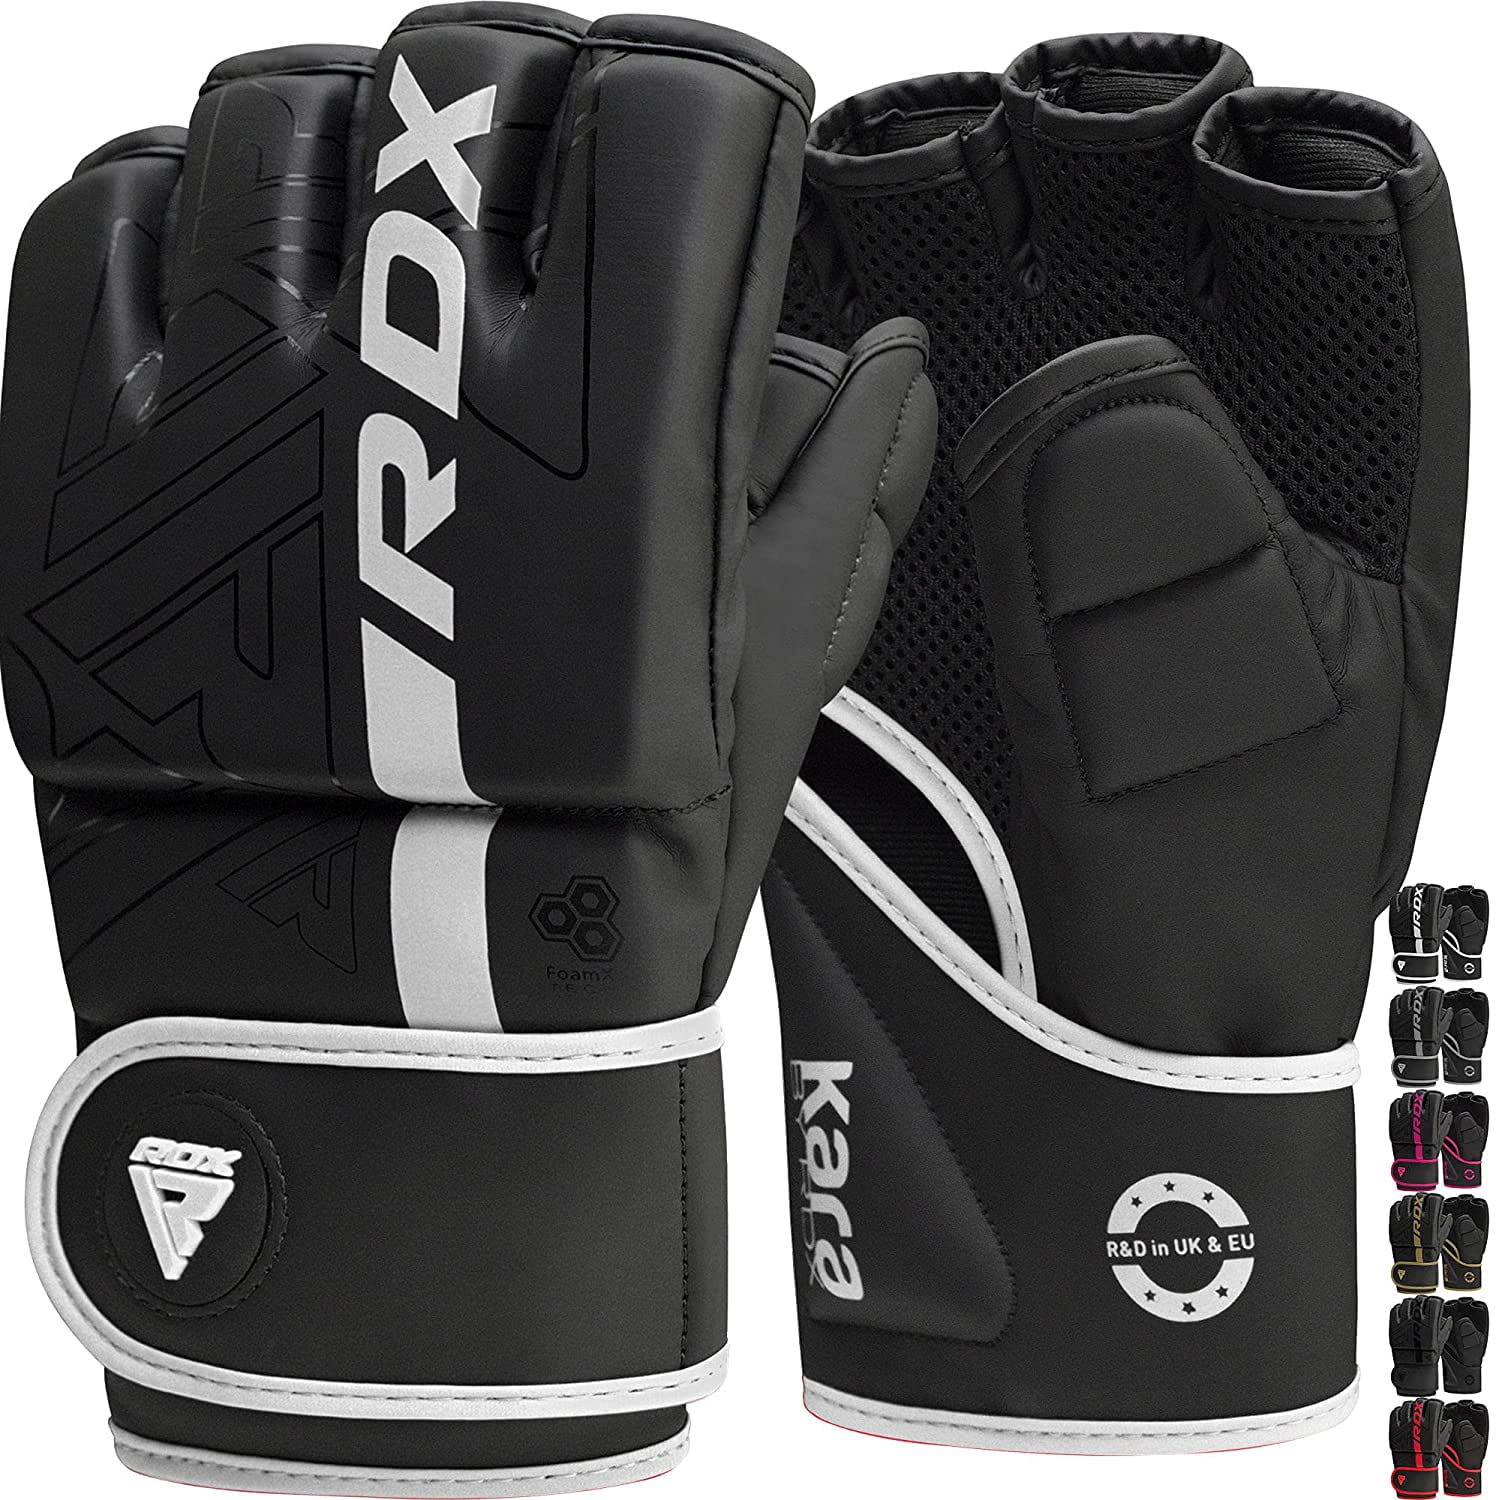 No Tax Free Shipping MMA Safety Sparring Gloves in Genuine Leather Quality 